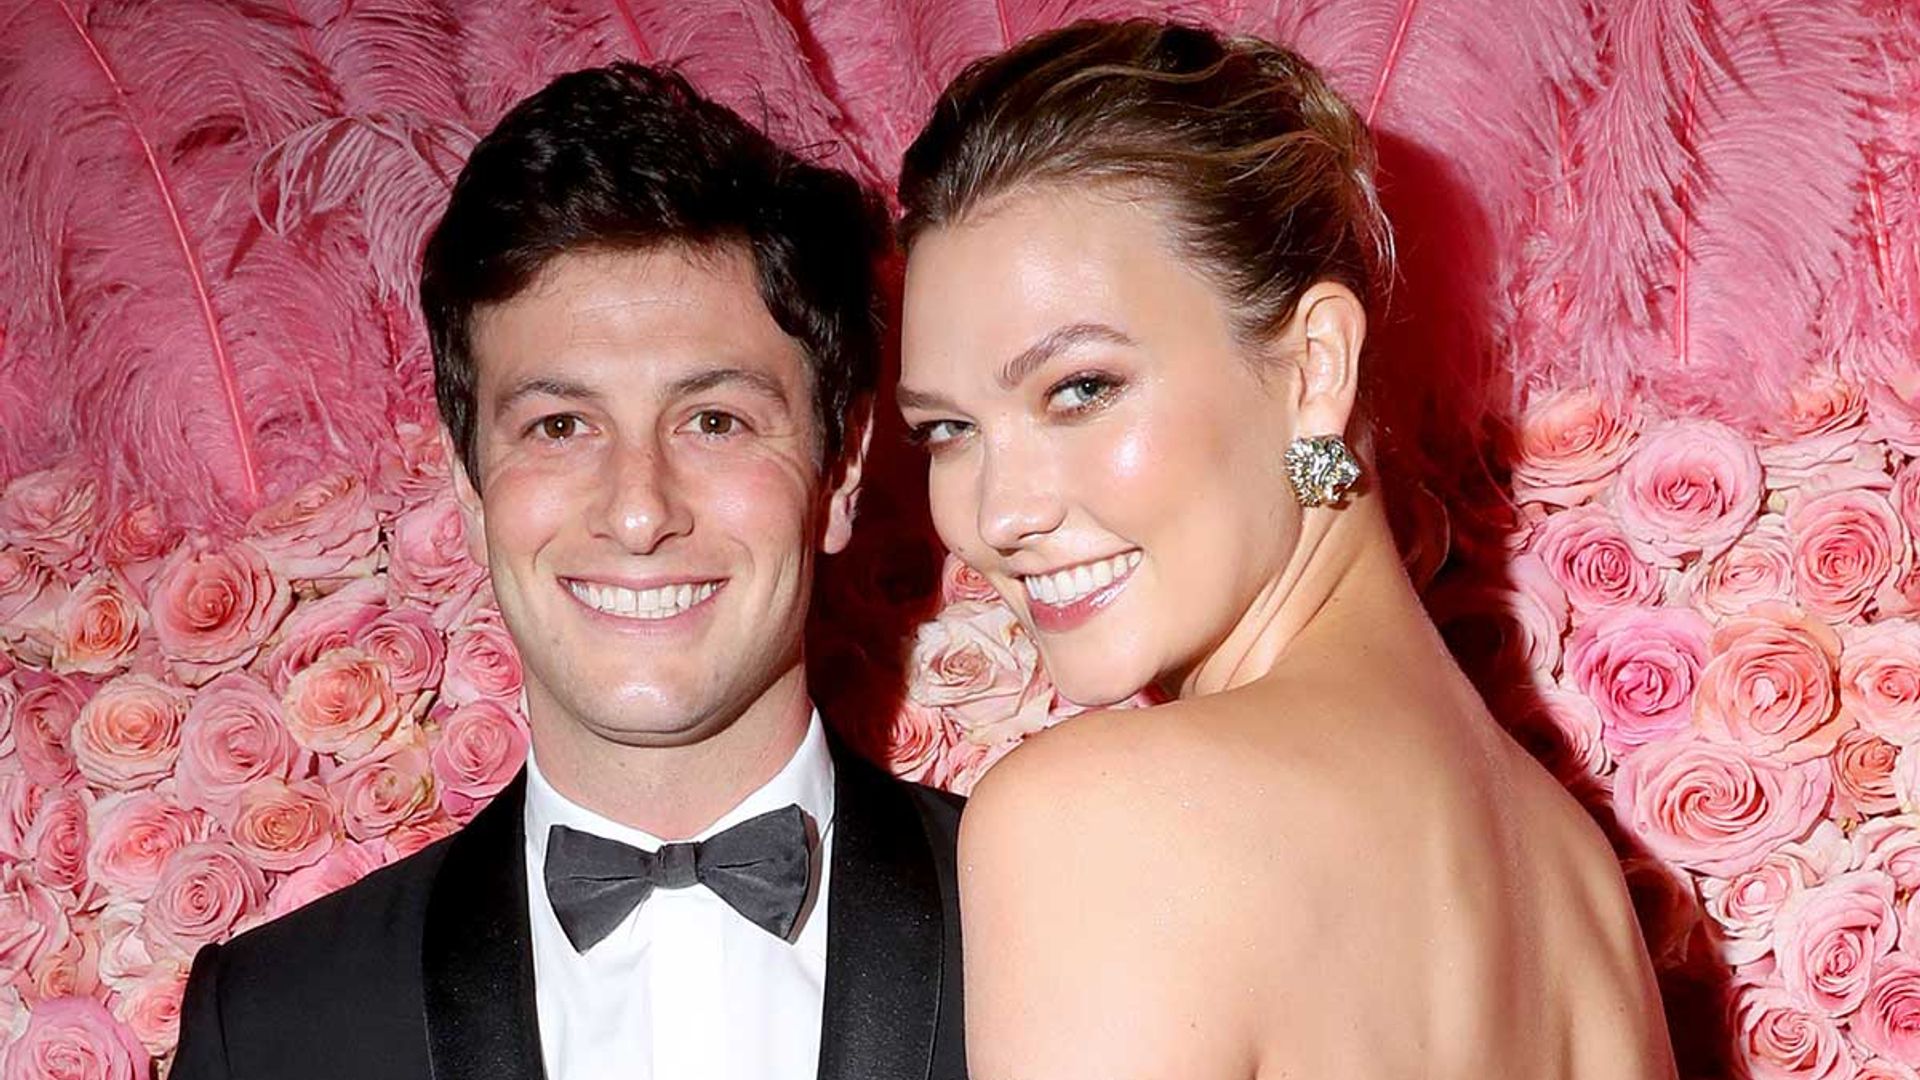 Karlie Kloss and Joshua Kushner welcome baby - see the first picture